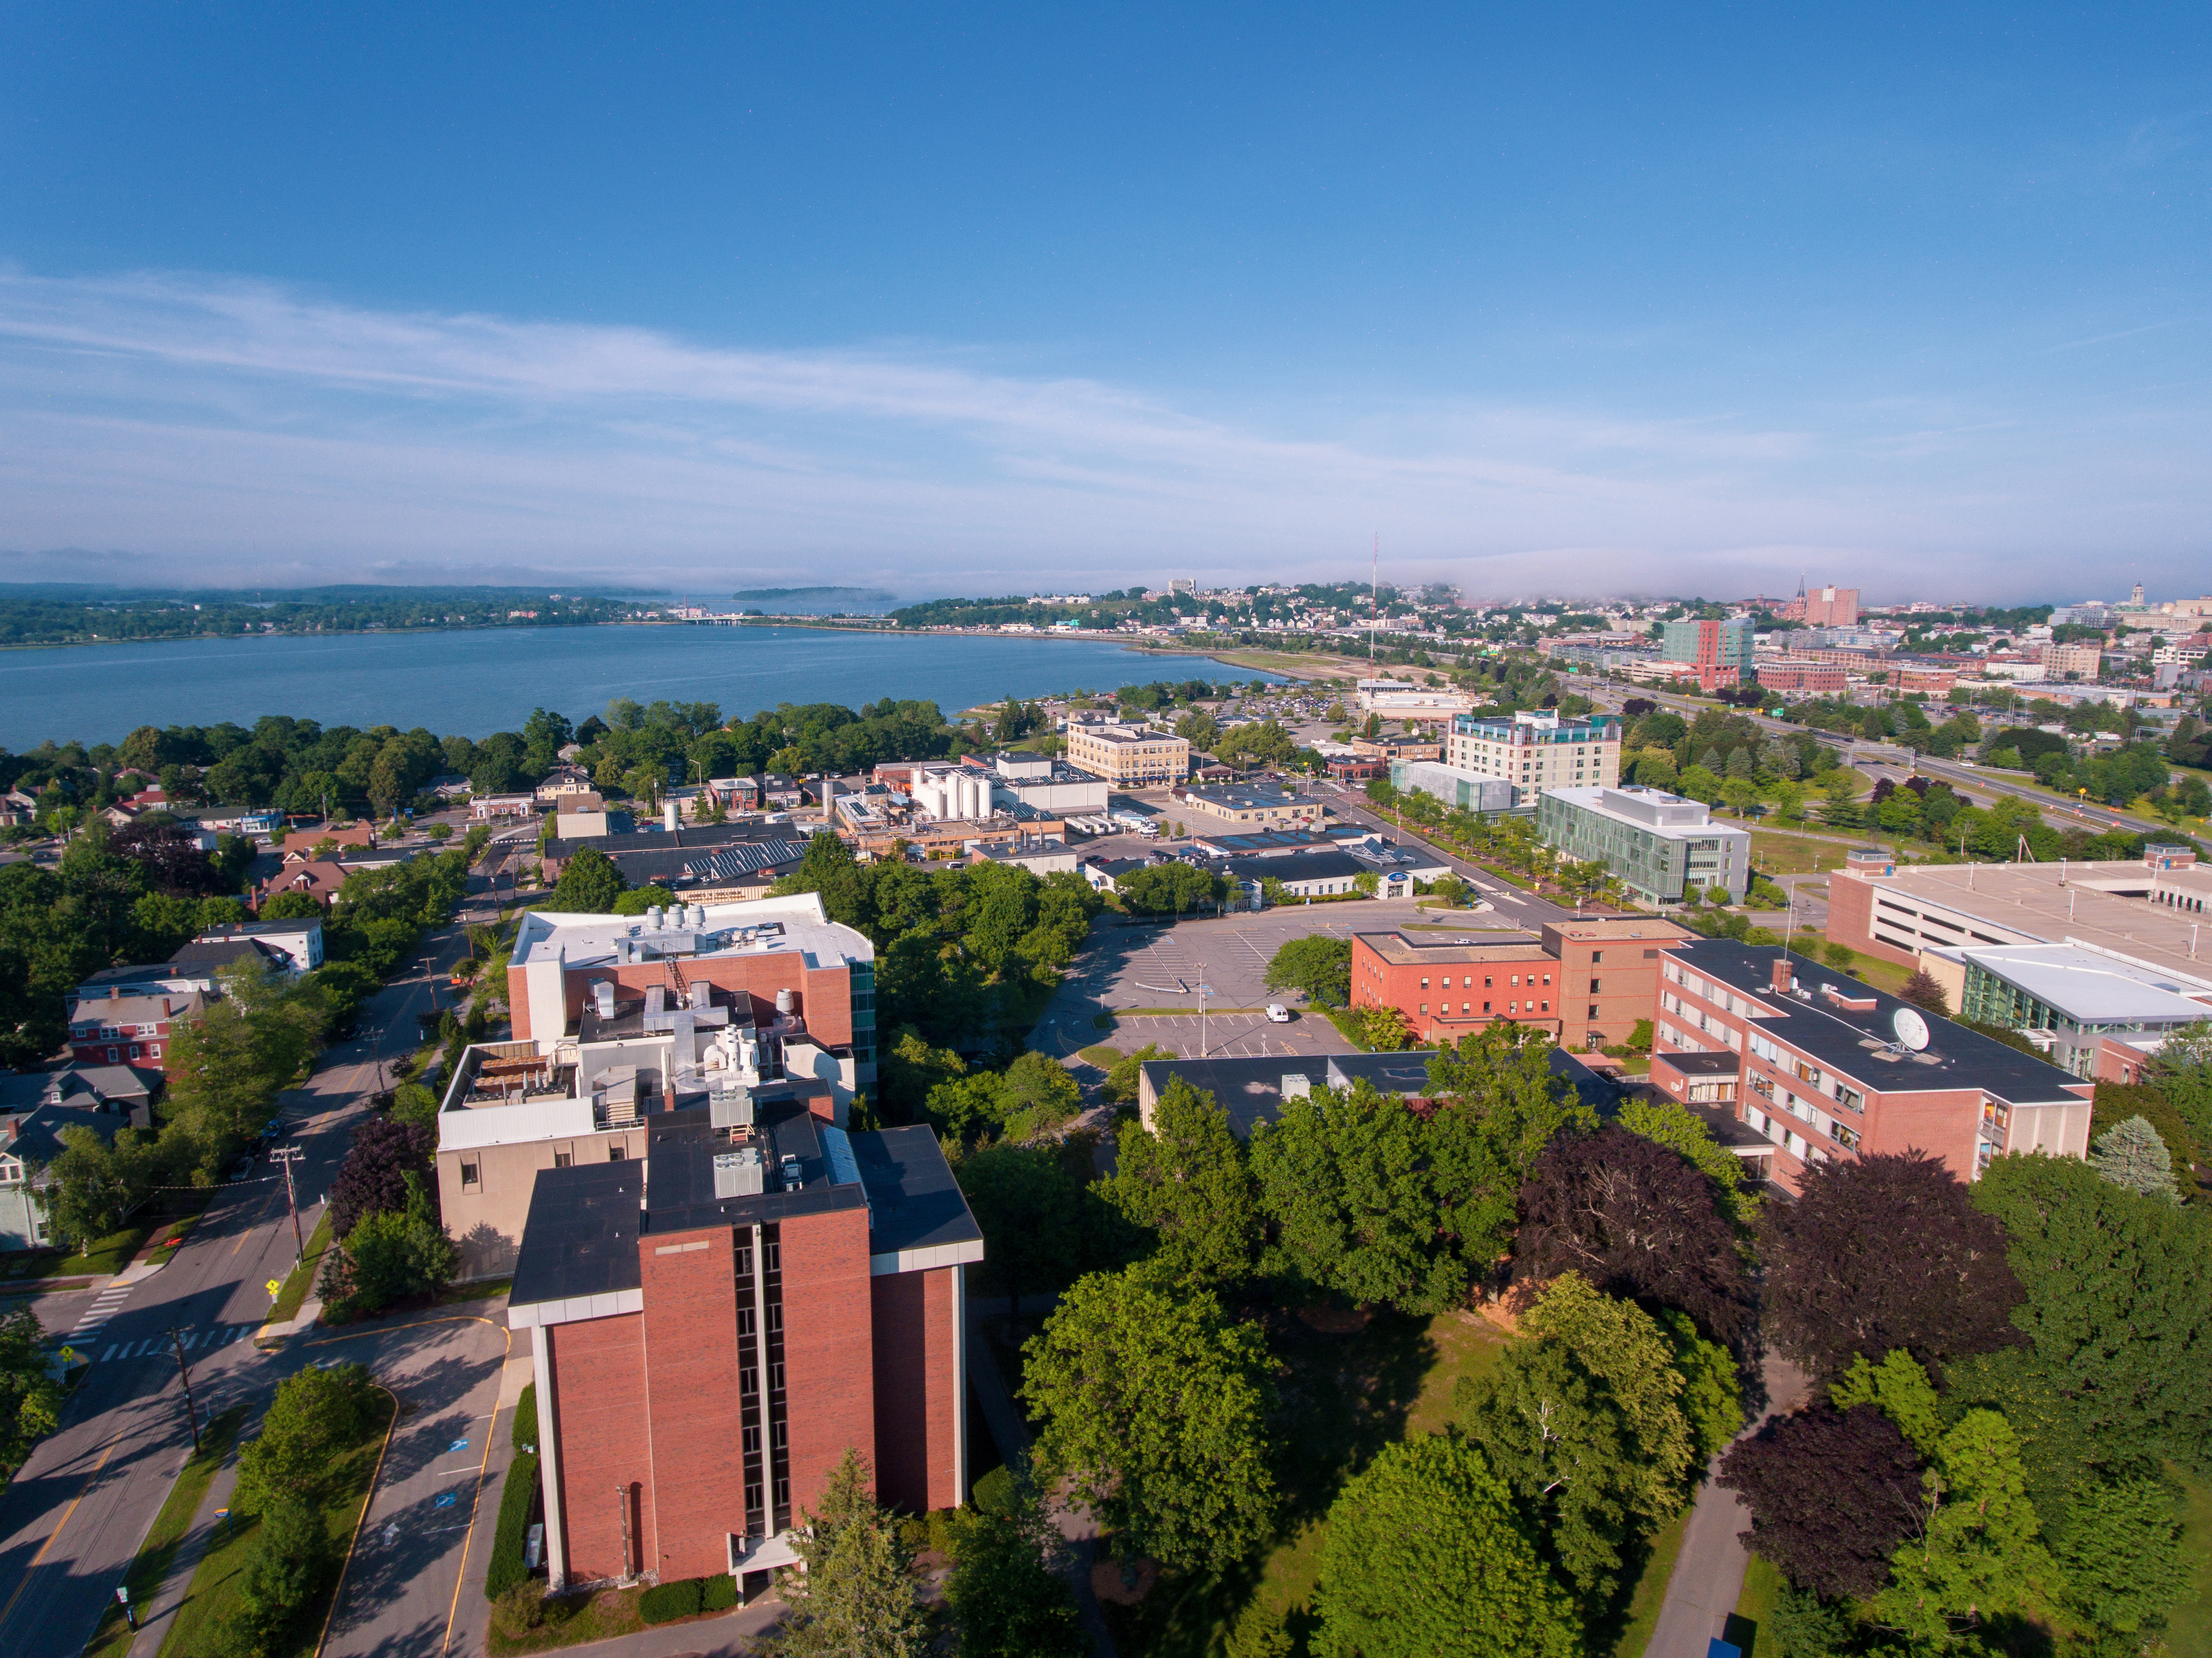 An aerial image of the Unversity of Southern Maine's Portland campus. The image shows various buildings such as the Science Building, Luther Bonney, and Masterton. The Back Cove can be seen in the background.